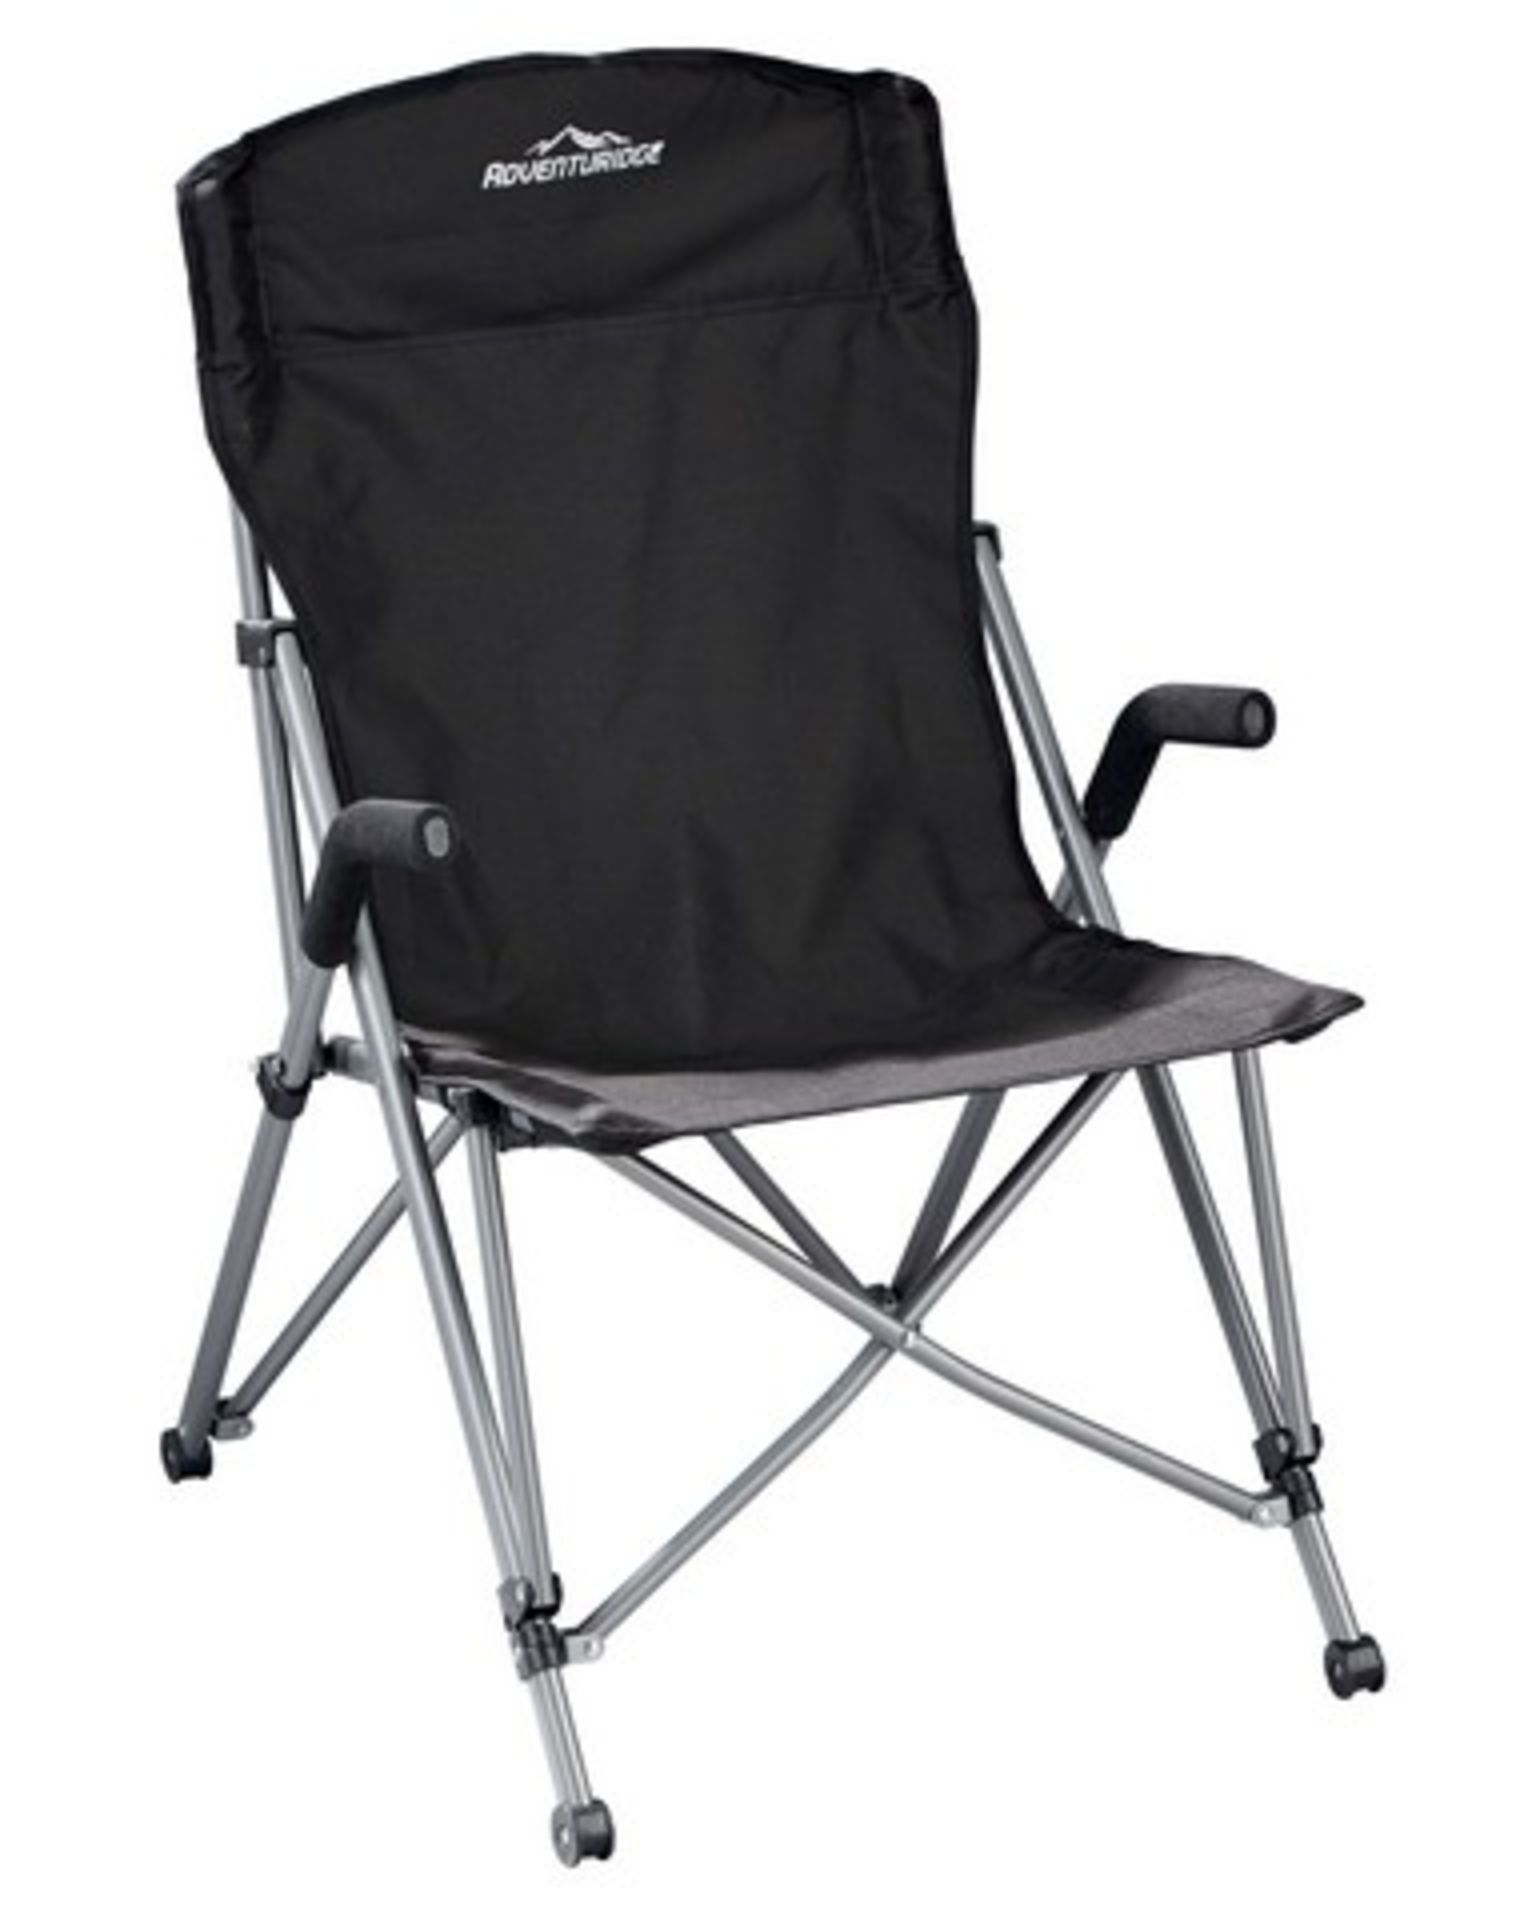 + VAT Brand New Expedition/Tourer Chair In Silver/Black With Carry Case - Lightweight Steel Frame